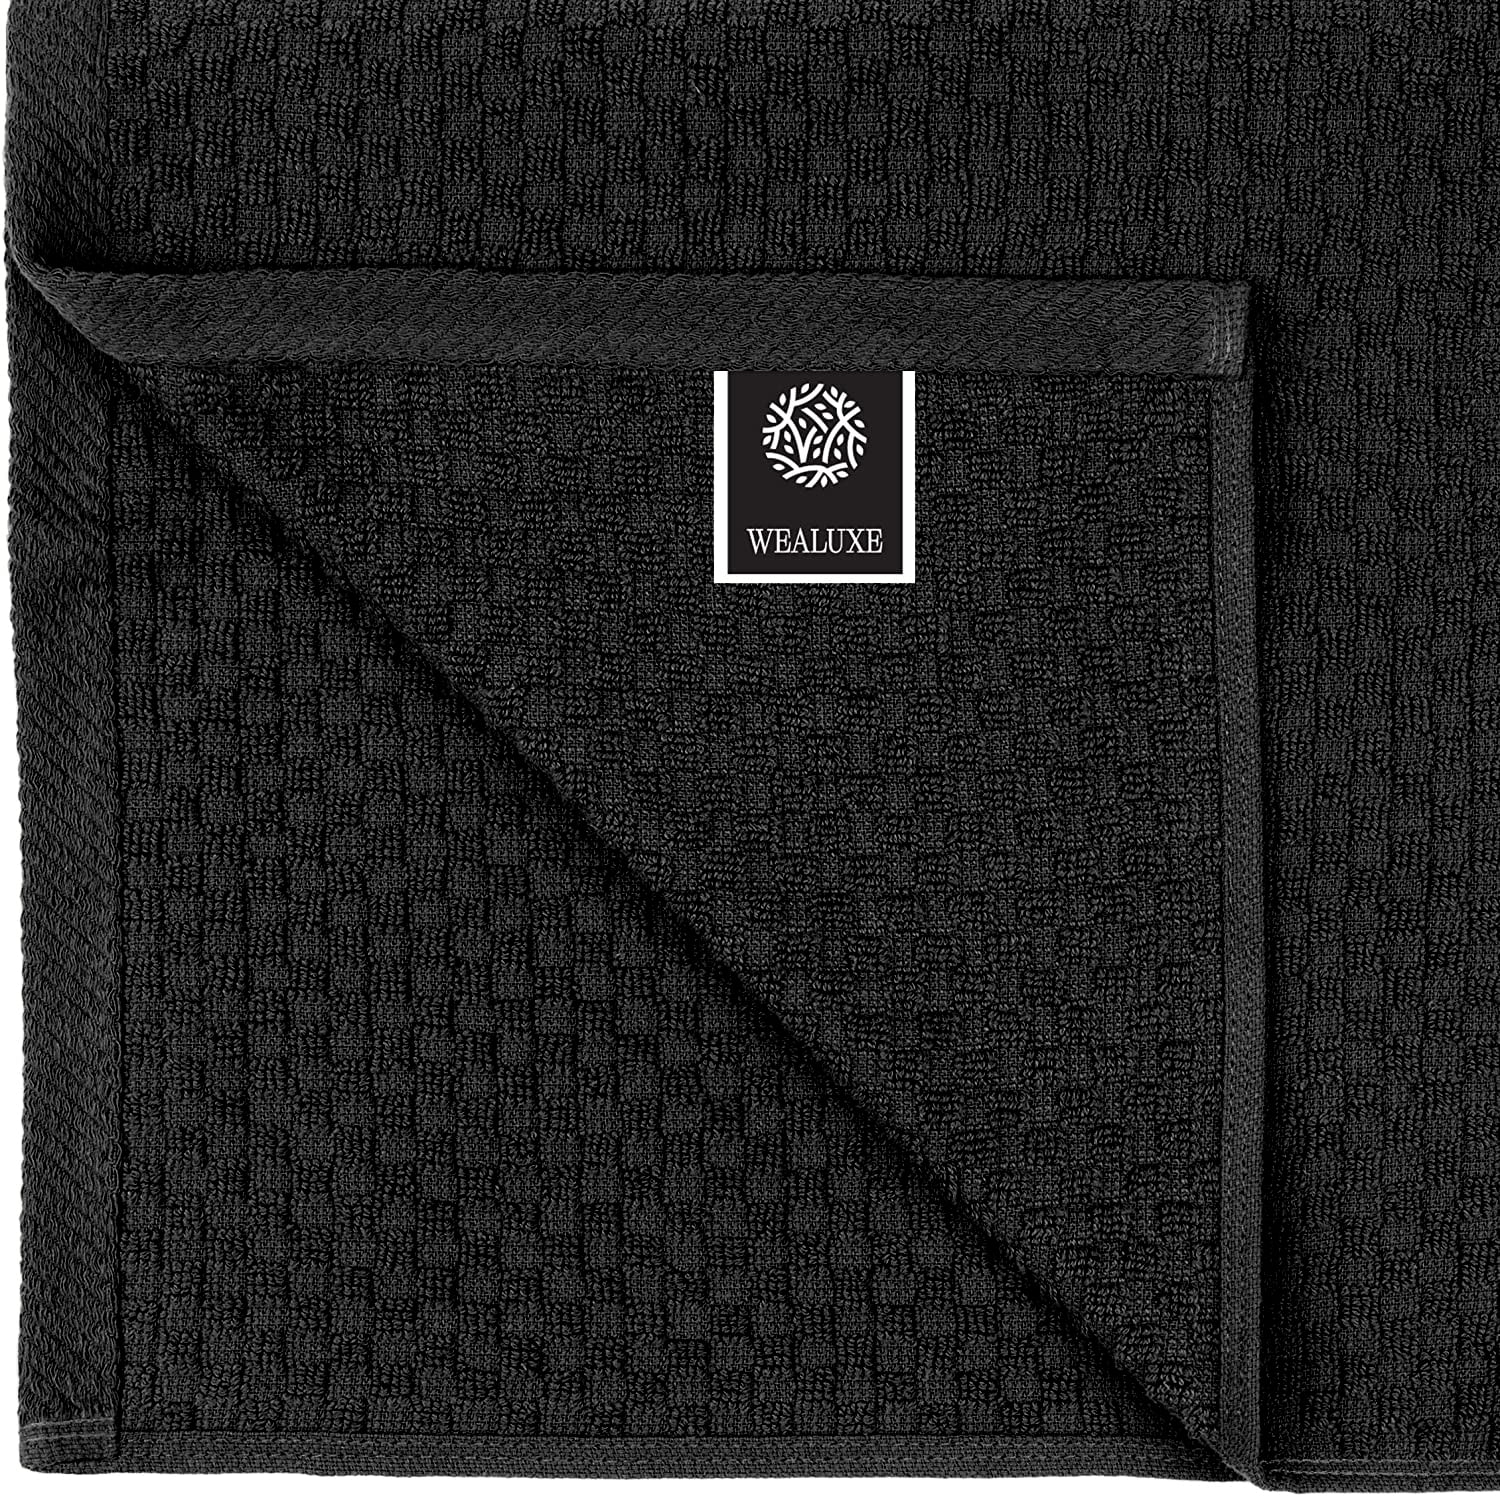 12 Pack] Kitchen Dish Hand Towels, 100% Cotton Dobby Weave, 410GSM